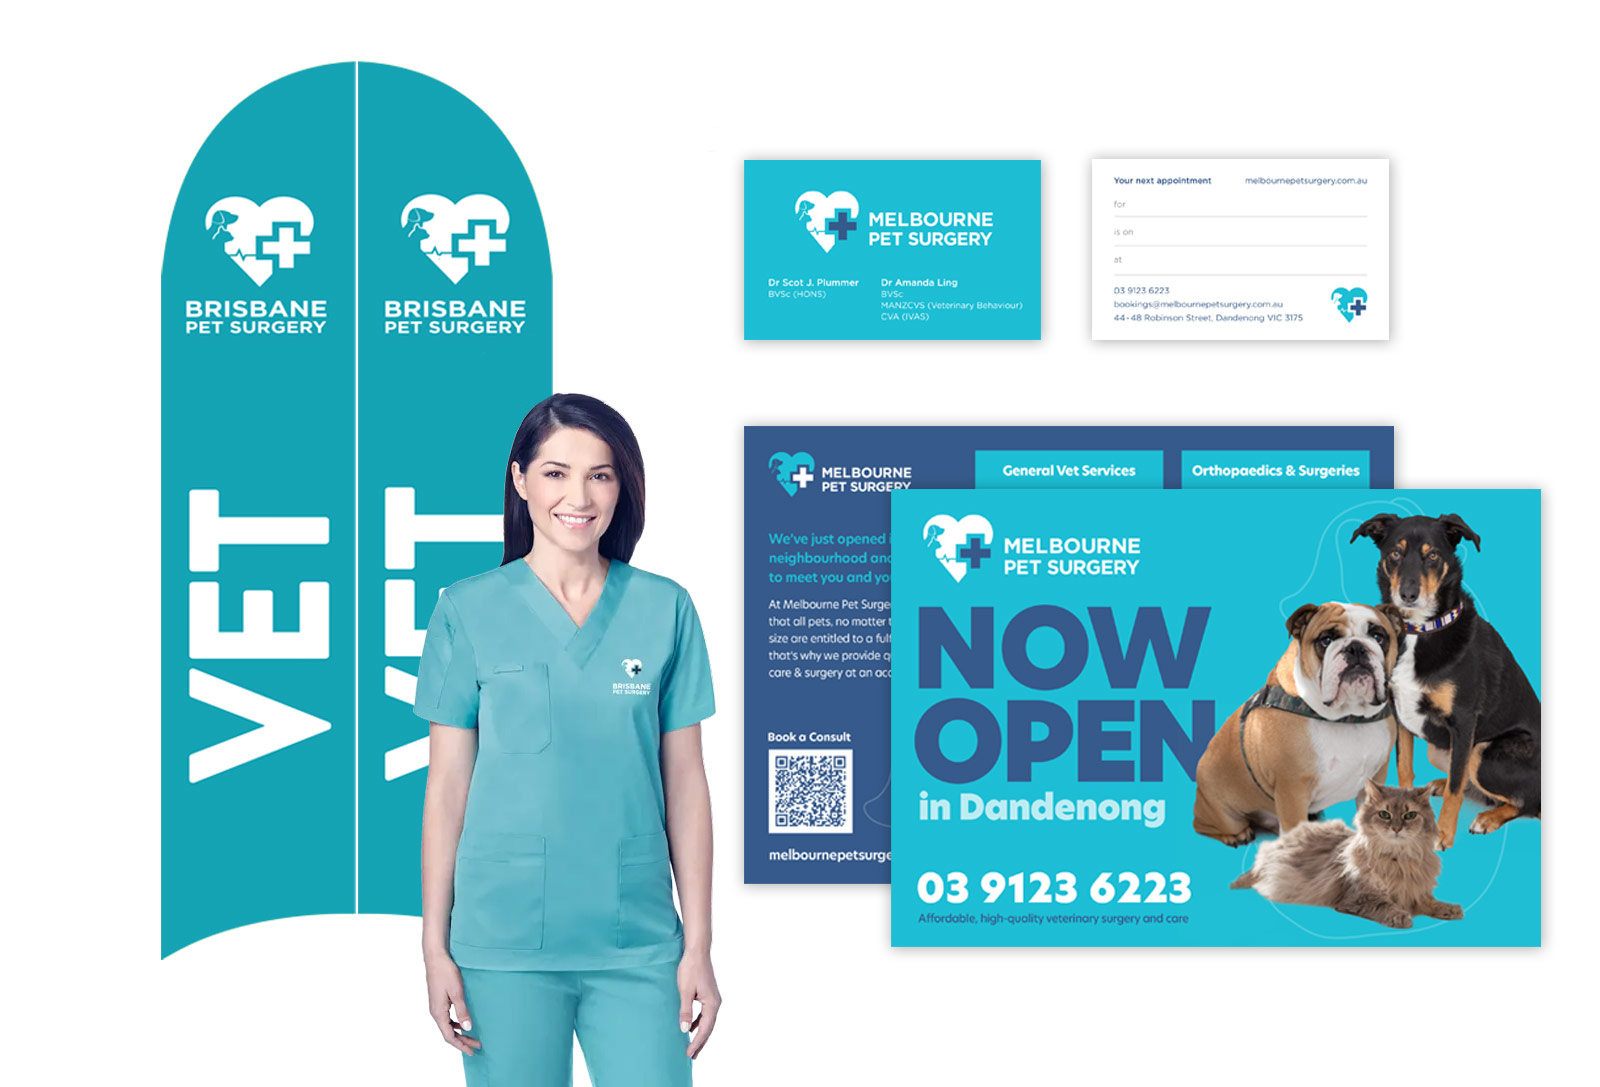 Zeemo helped Brisbane Pet Surgery finalise their brand name, identity and domain